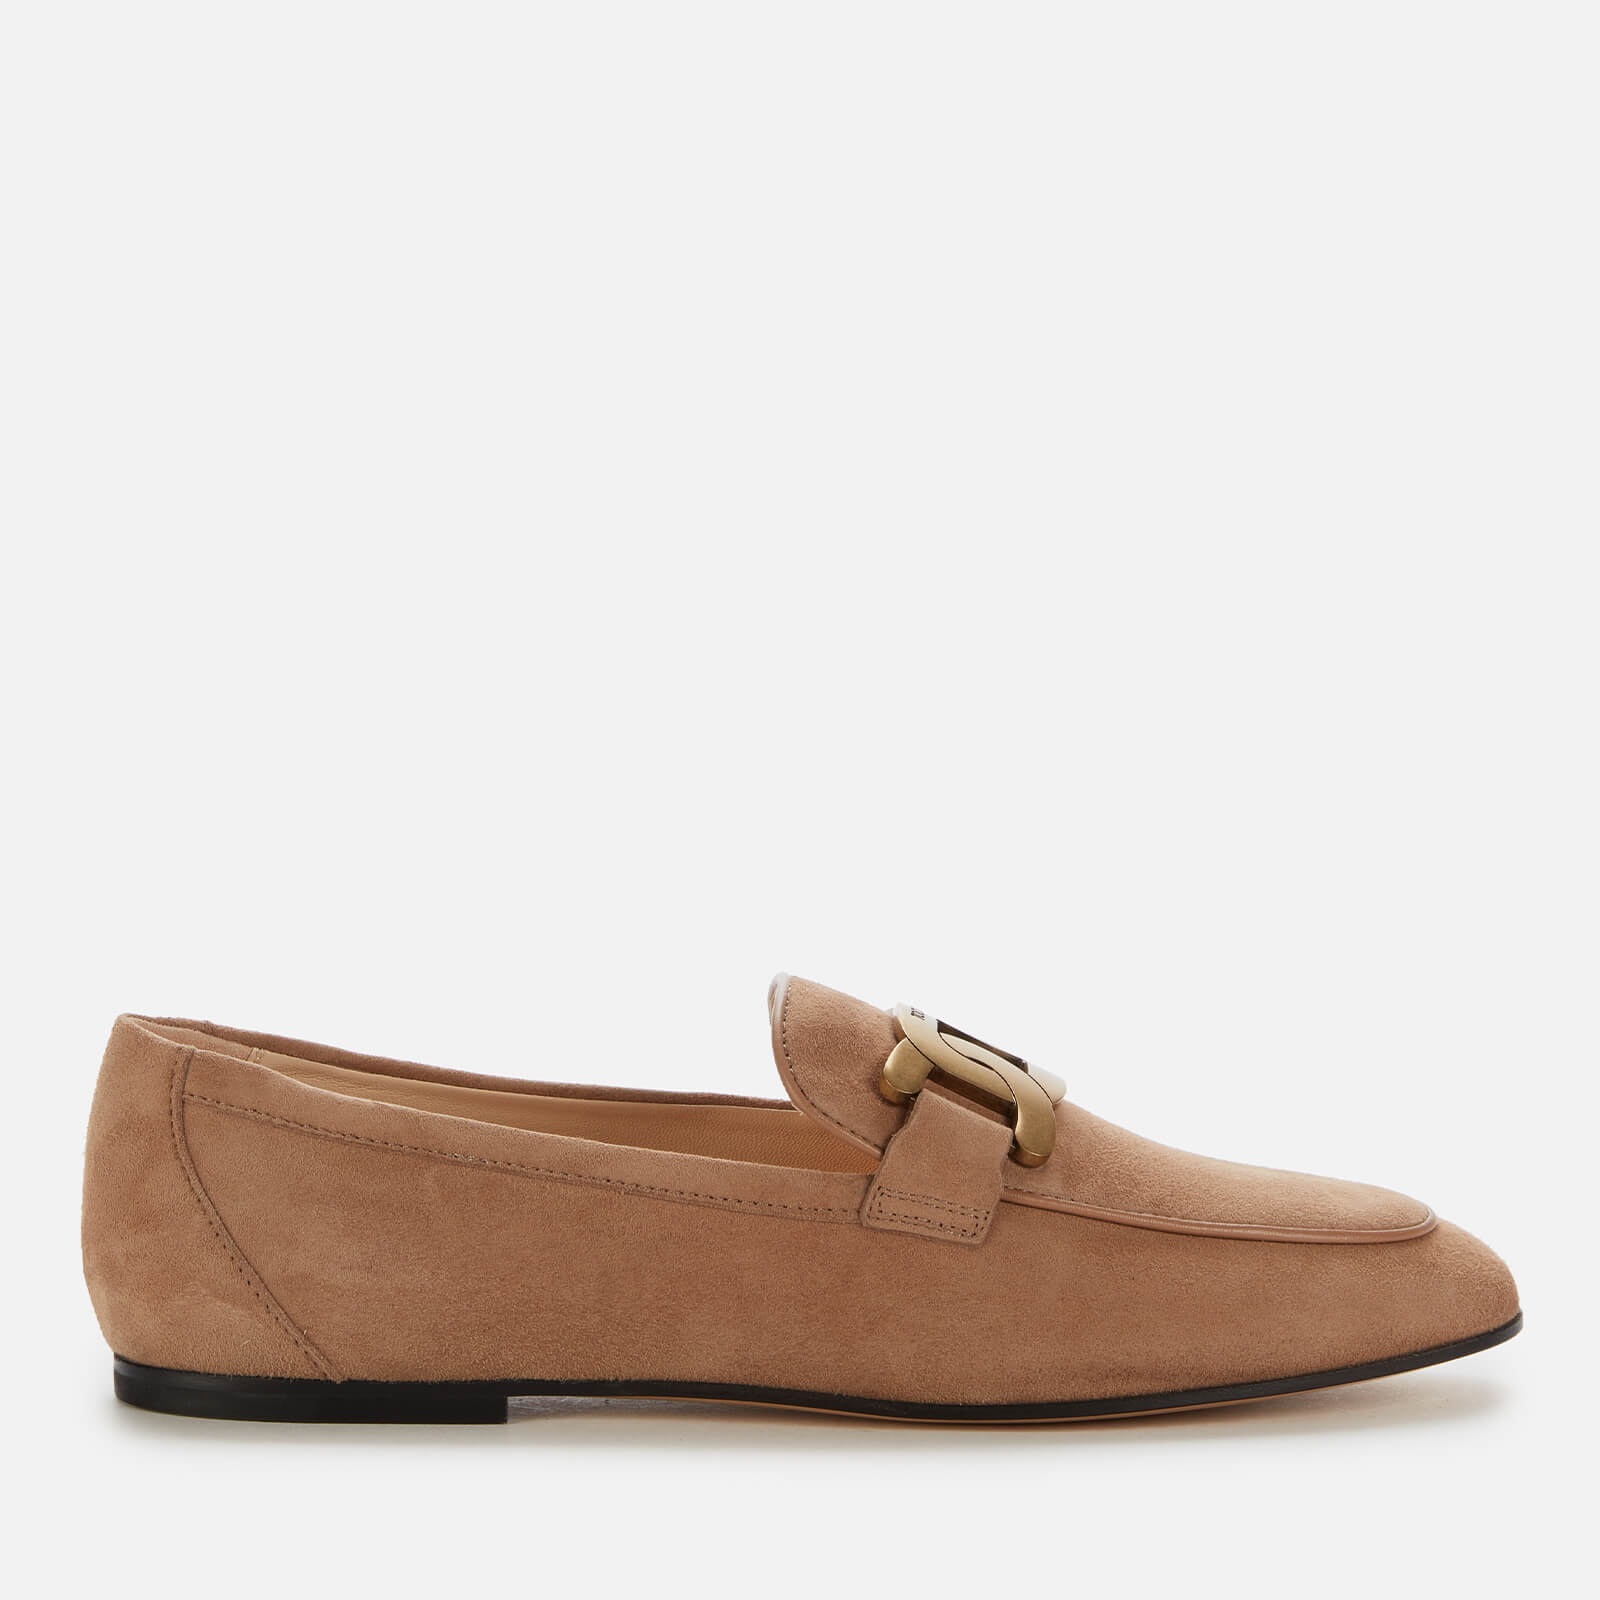 Tod's Women's Kate Suede Loafers - Beige - UK 6